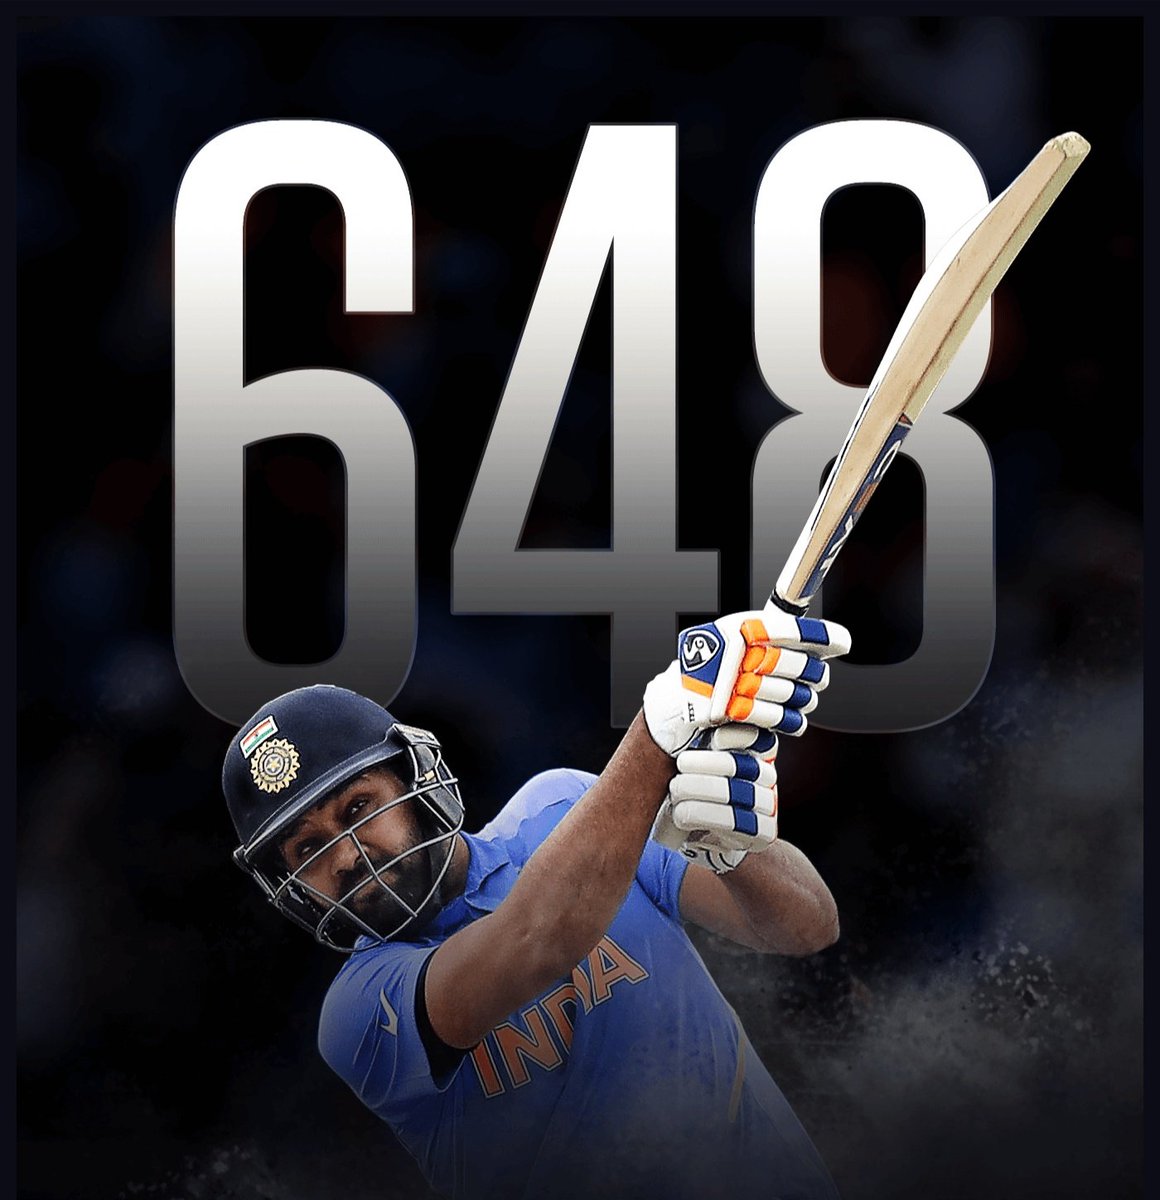 Iconic number from 2019 WC - 648. The man for the World cups - Rohit Sharma! #HappyBirthdayRohit